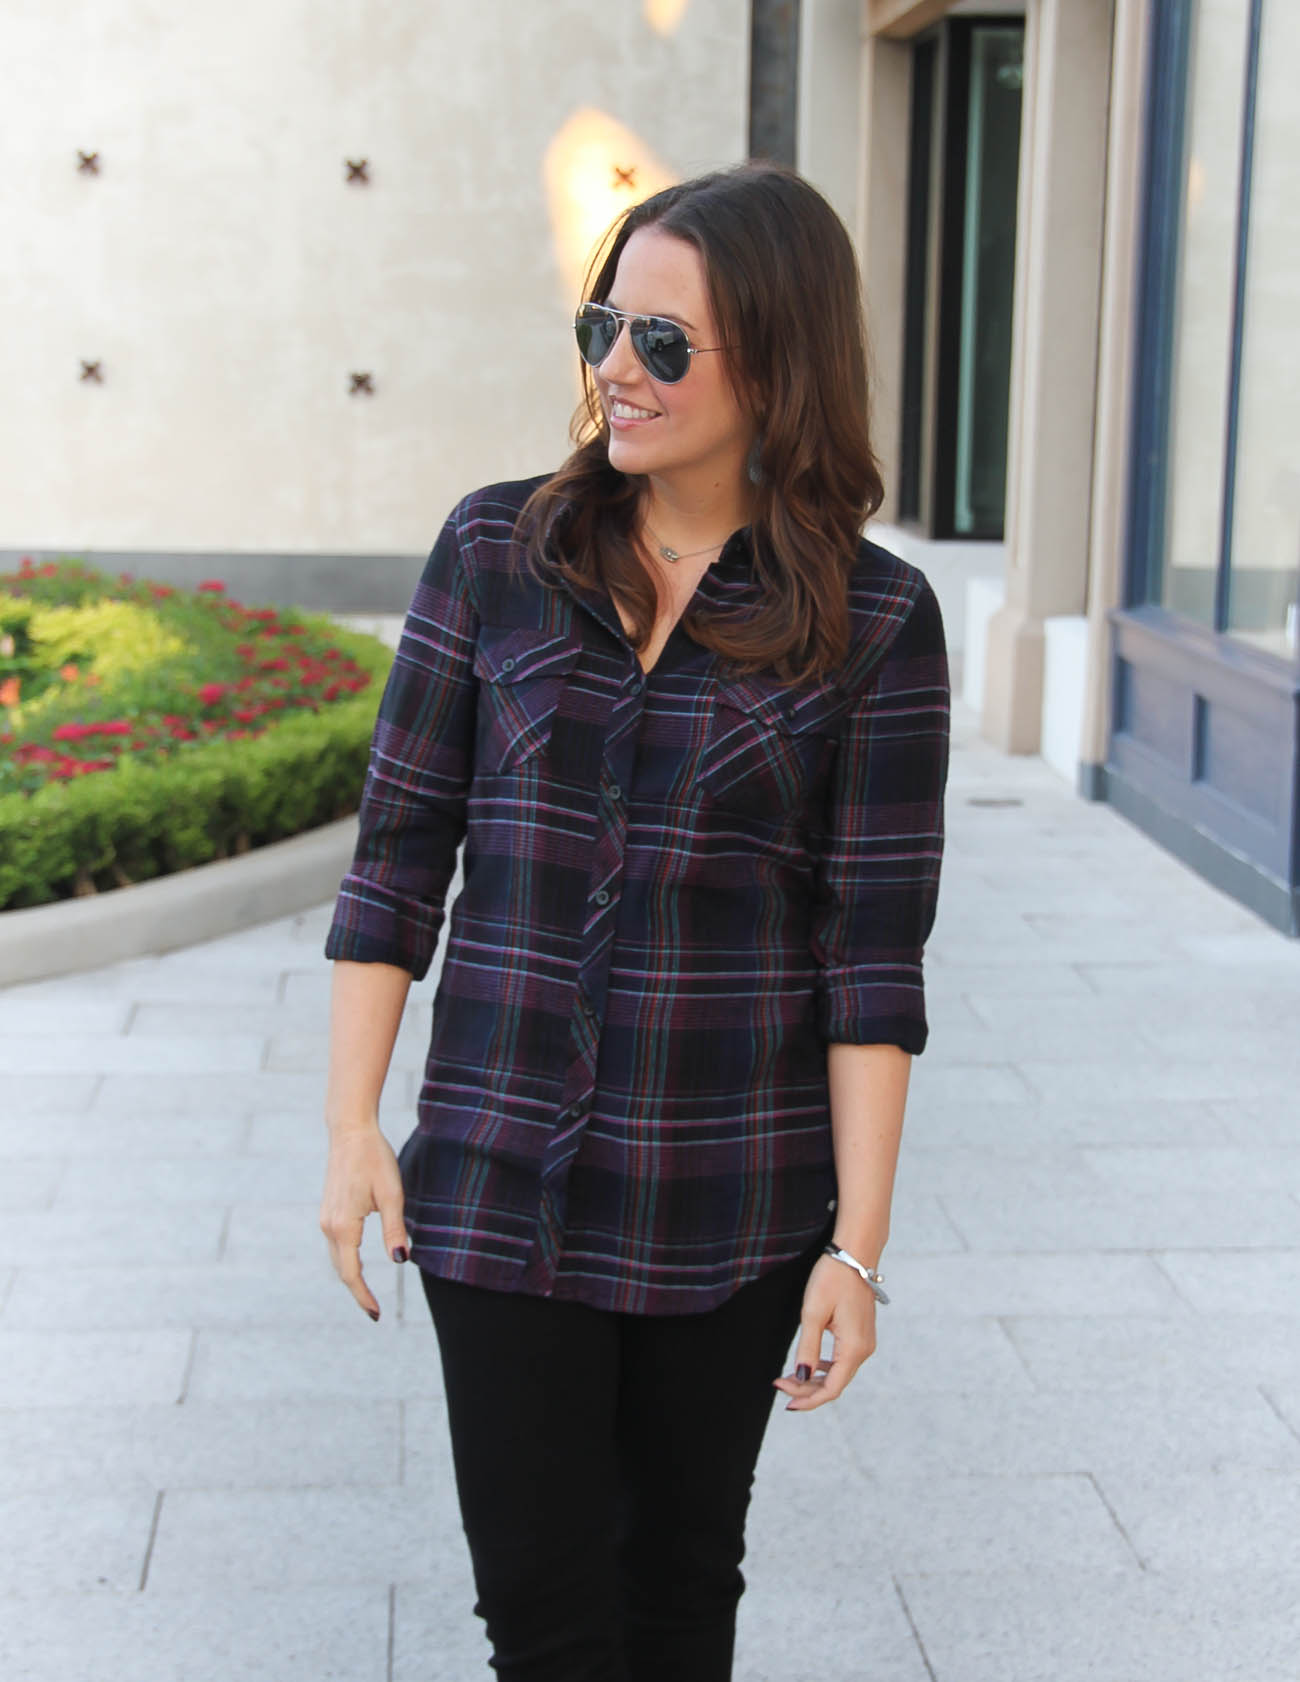 Dressing Up Plaid Shirts for Fall | Lady in Violet | Houston Fashion ...